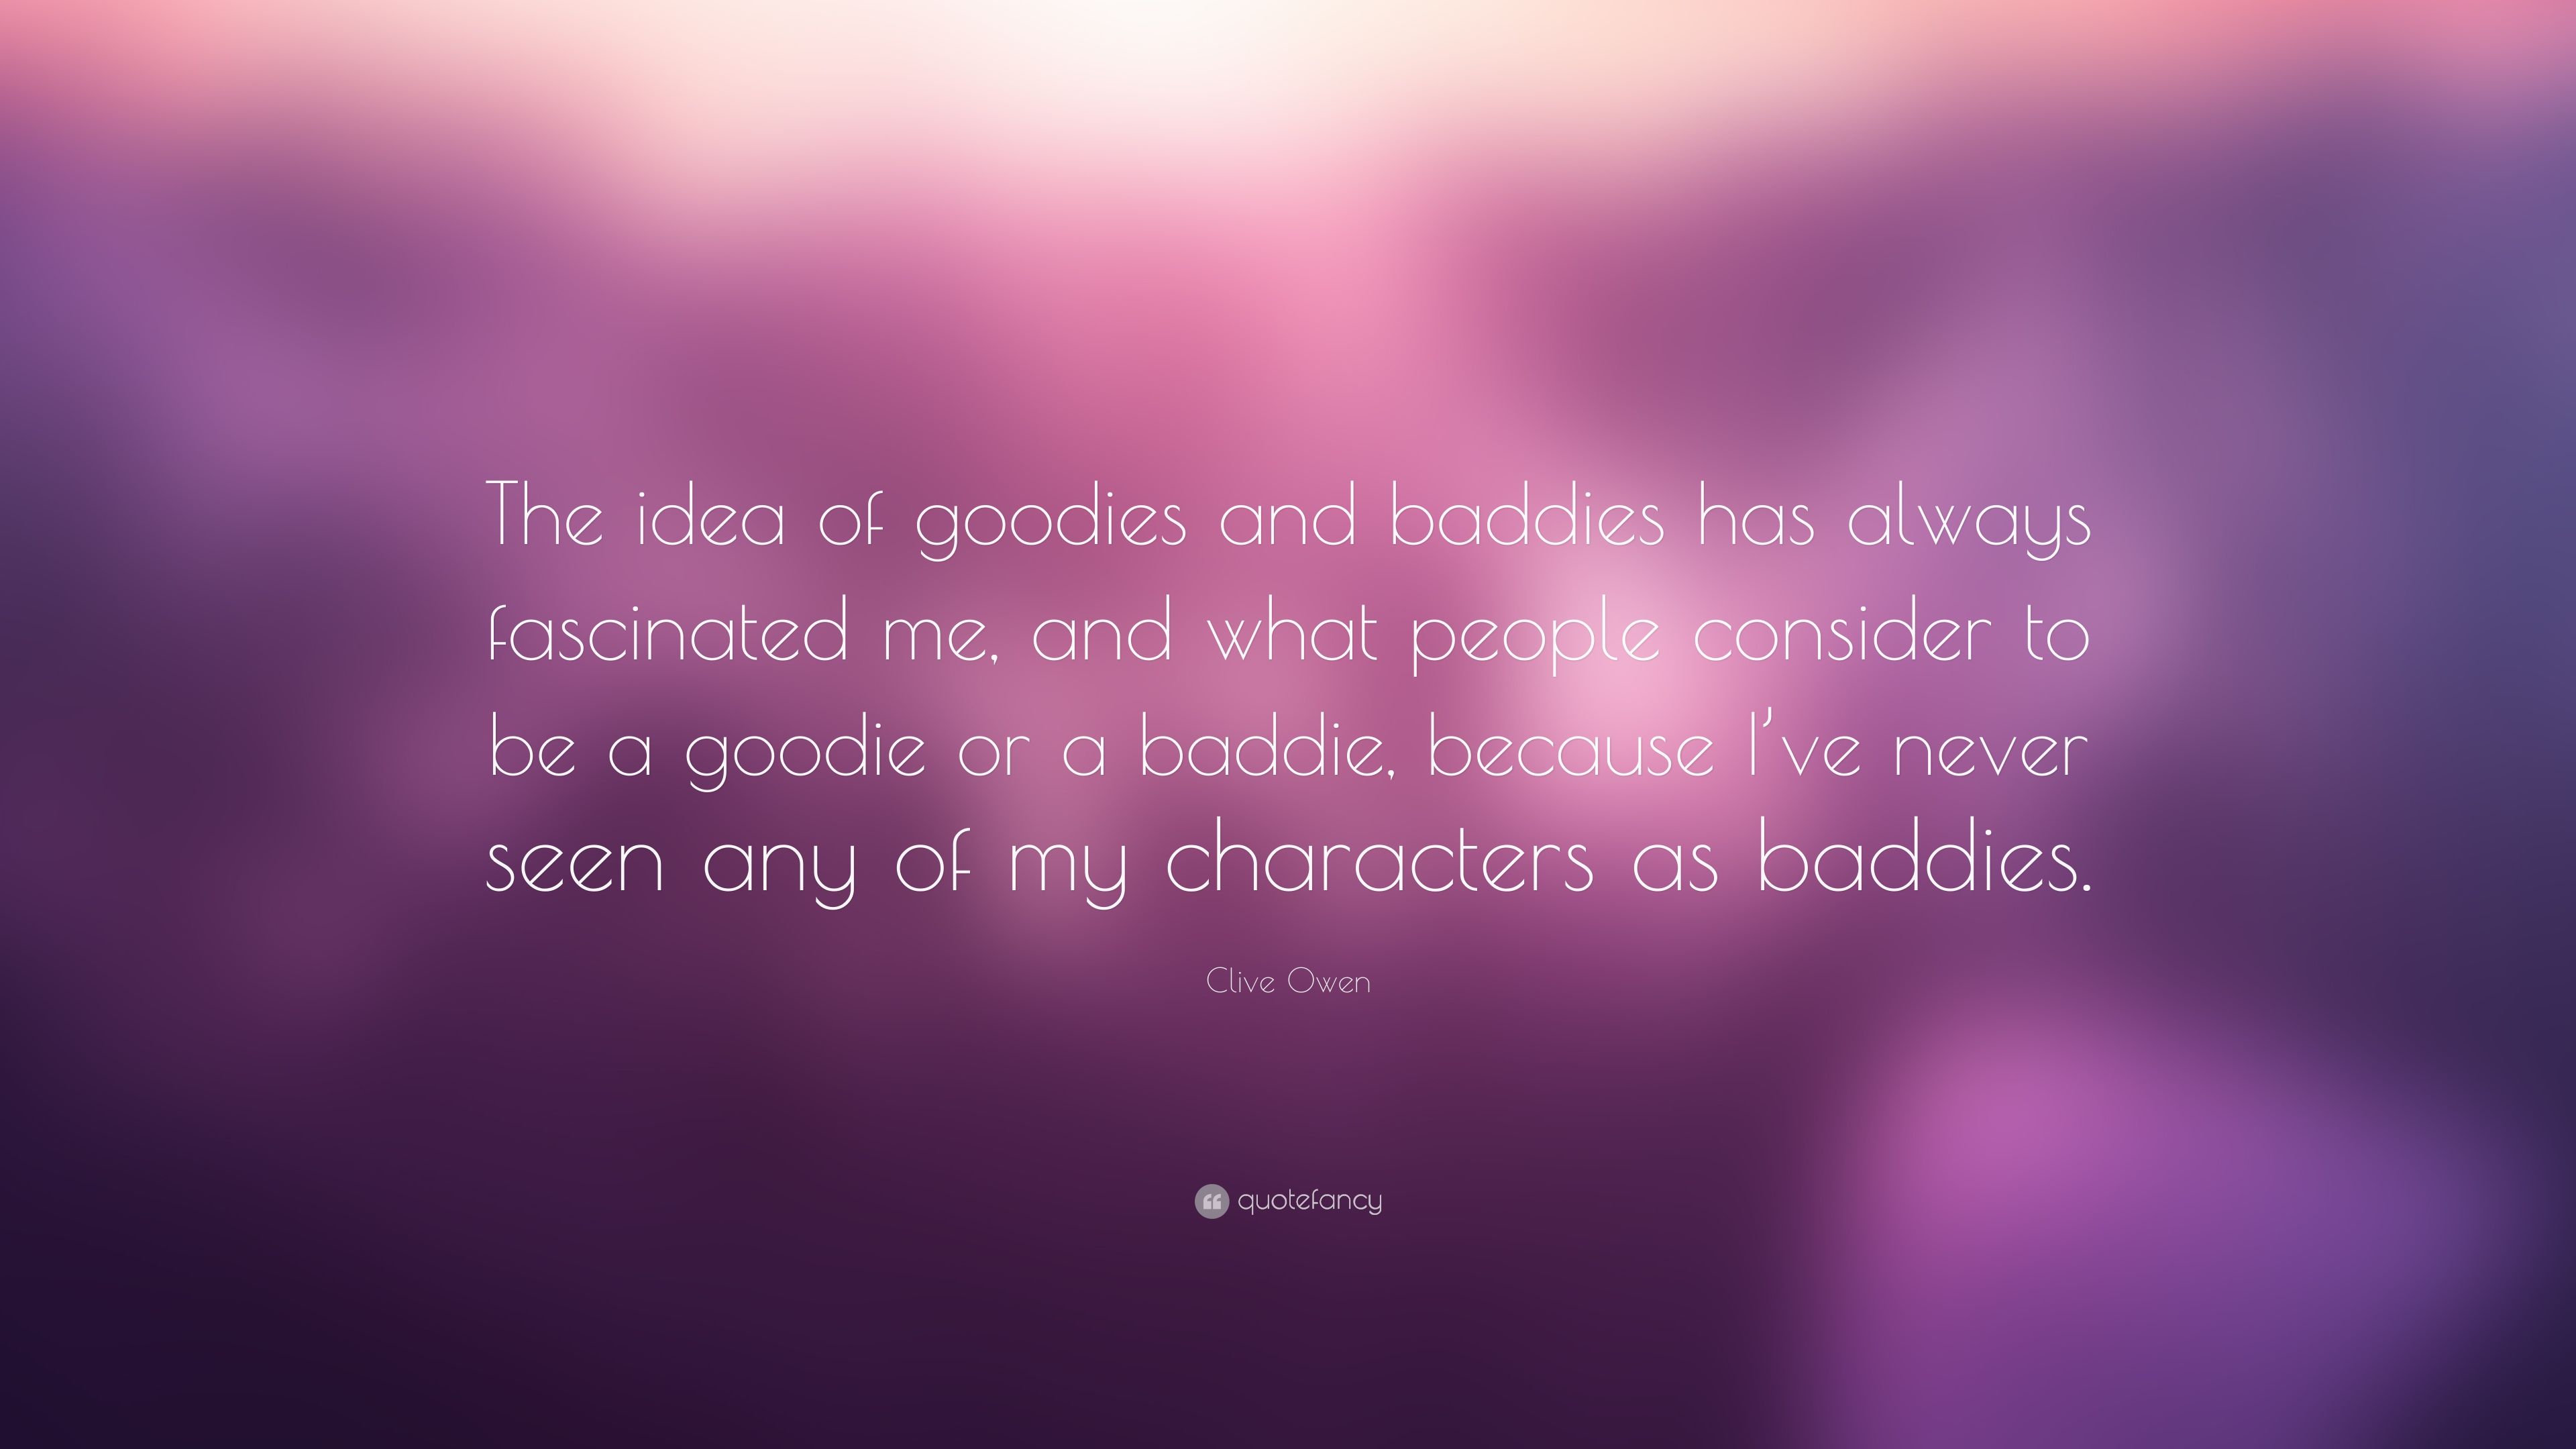 Clive Owen Quote: “The idea of goodies and baddies has always